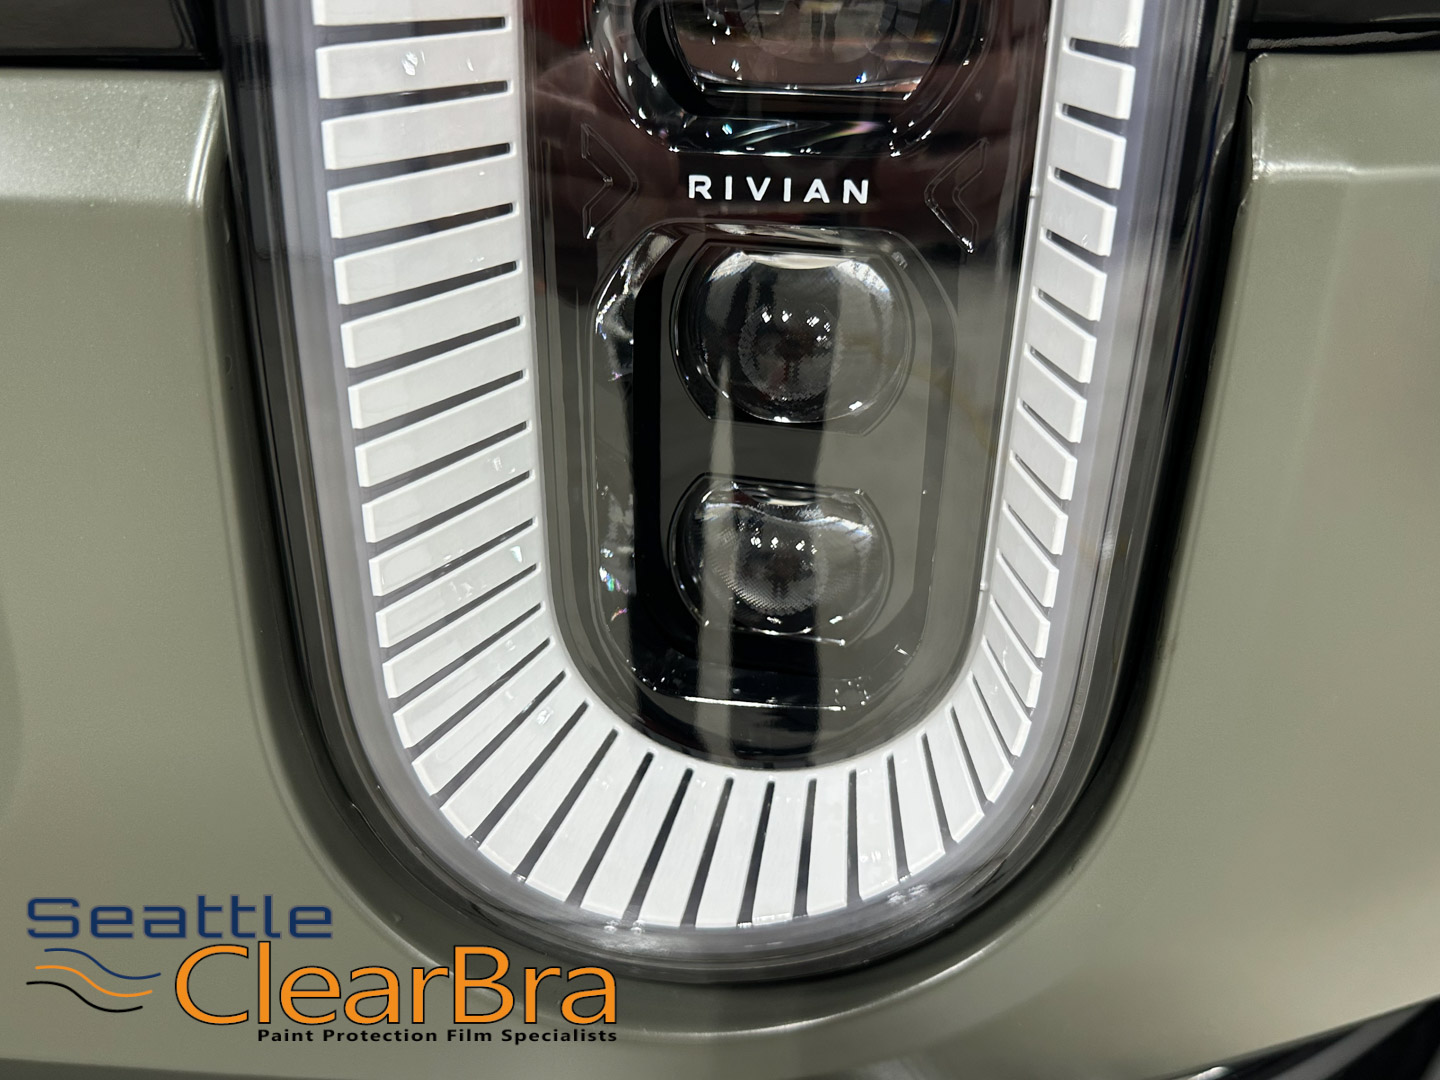 Rivian R1T R1S Poor Quality Stealth Satin PPF Clear Bra on Rivian R1T - Be Careful When Price Shopping rivian-r1s-xpel-stealth-redmond-clear-bra-ppf-paint-protection-film-19